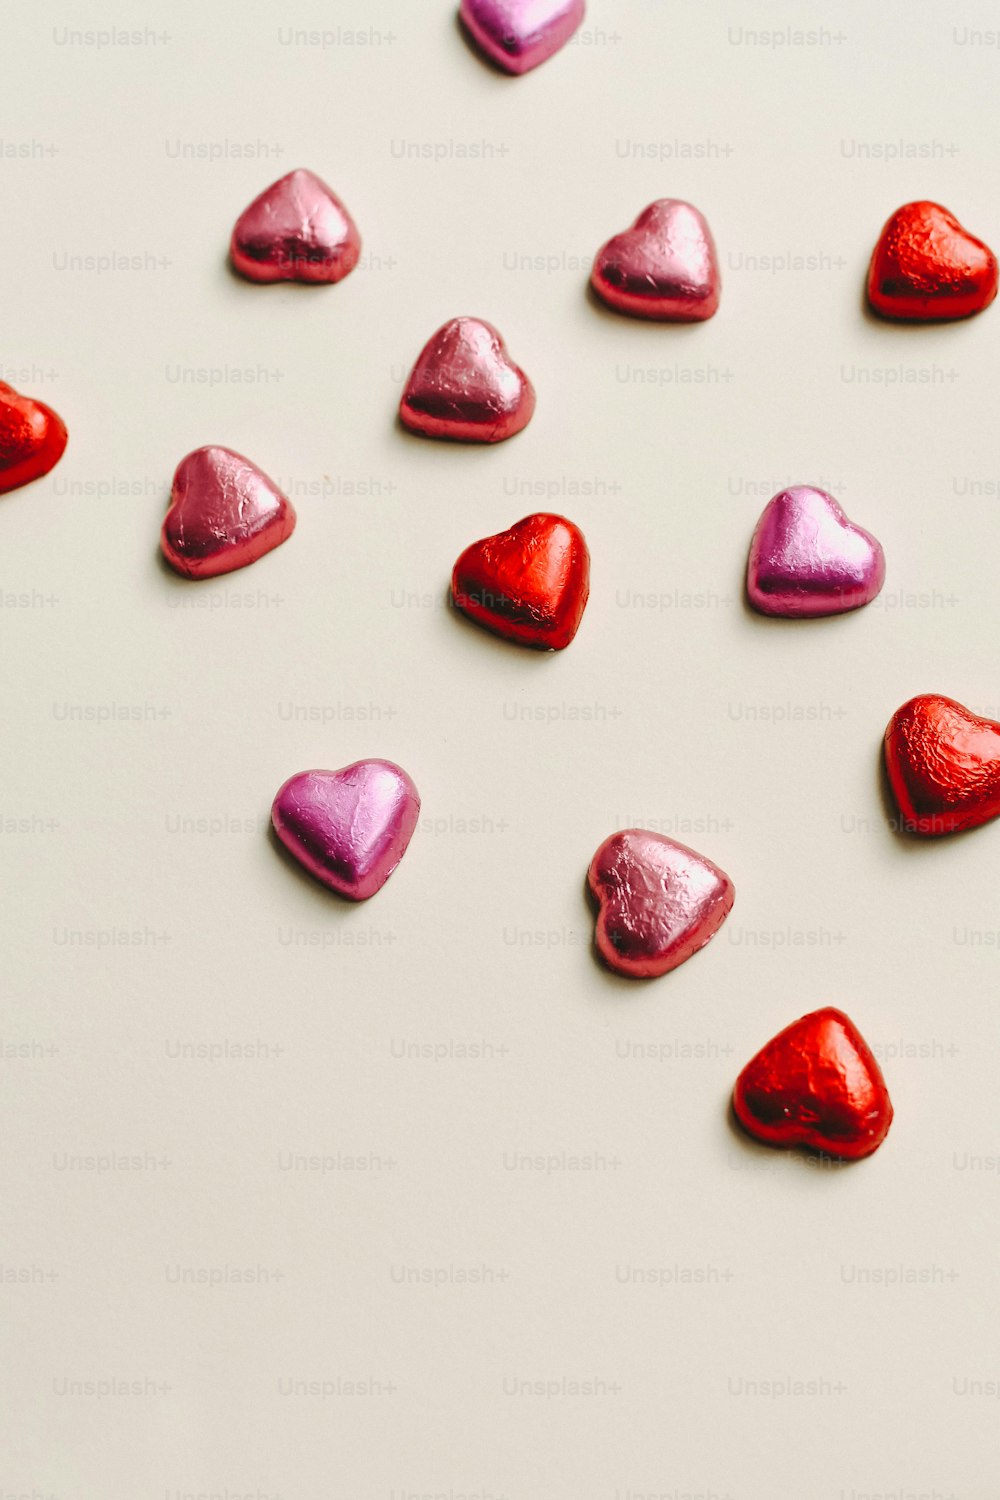 a group of heart shaped candies sitting on top of a table